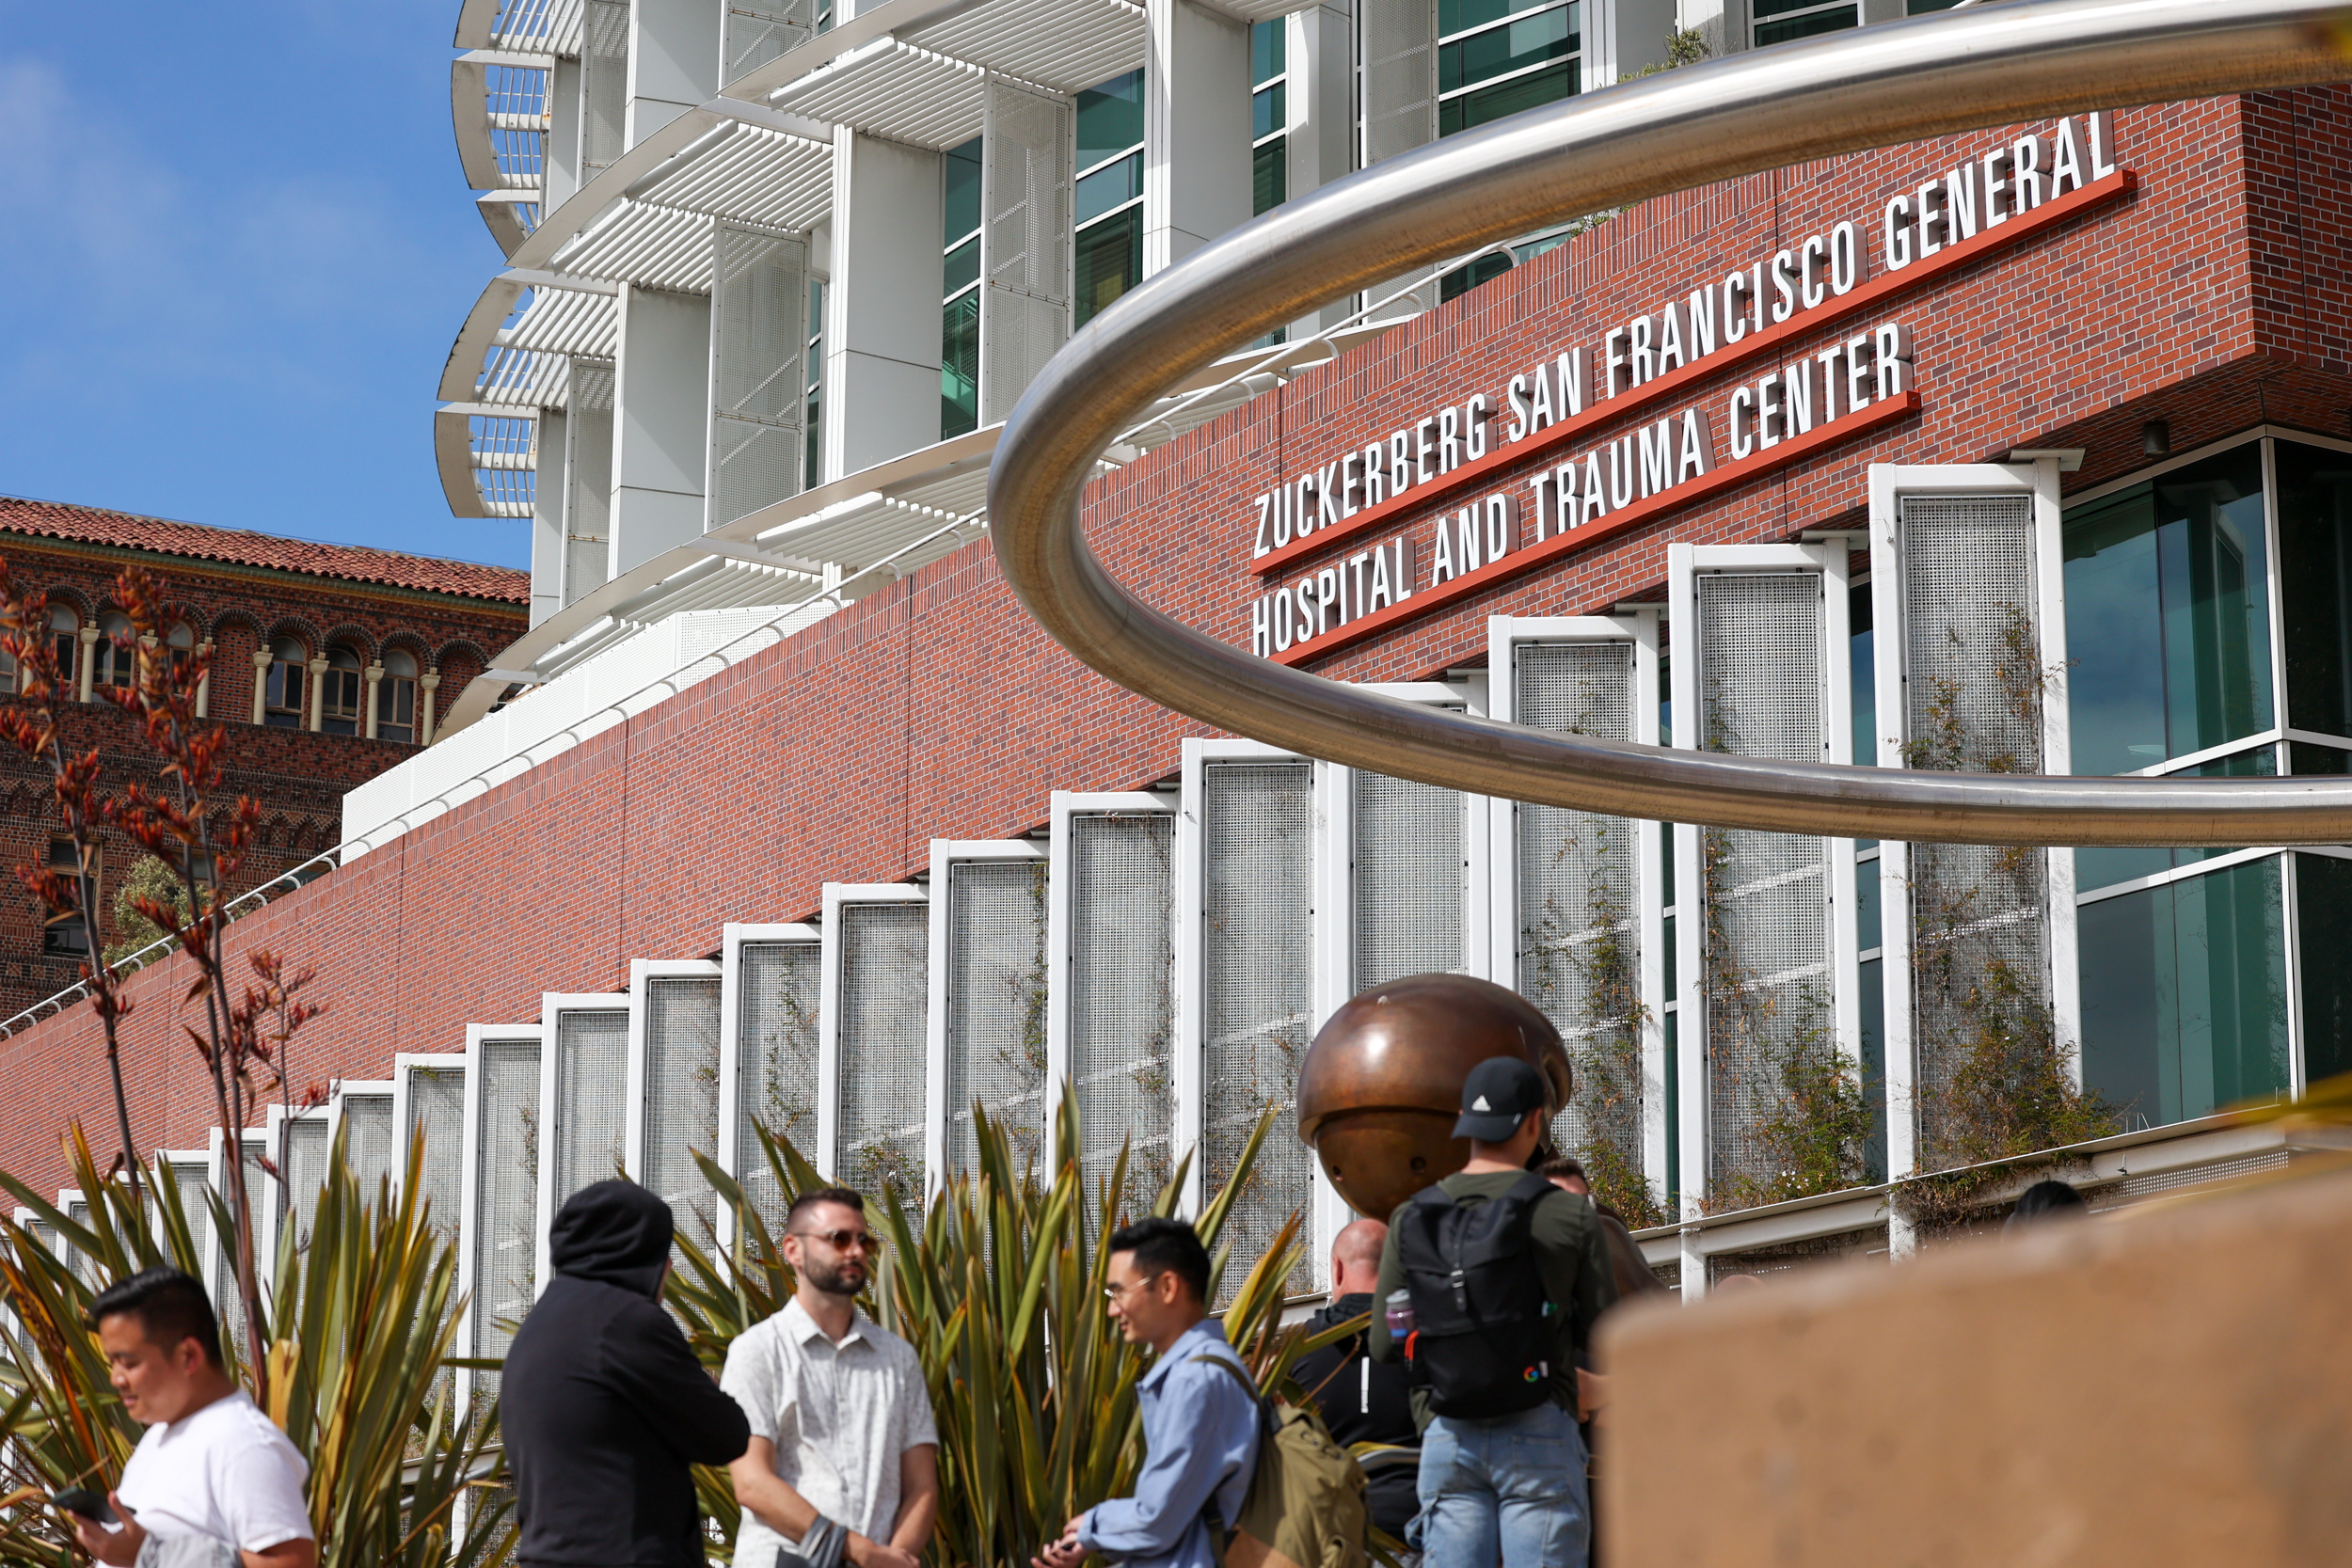 People converse outside a hospital with a large sign that reads &quot;Zuckerberg San Francisco General Hospital and Trauma Center&quot;.